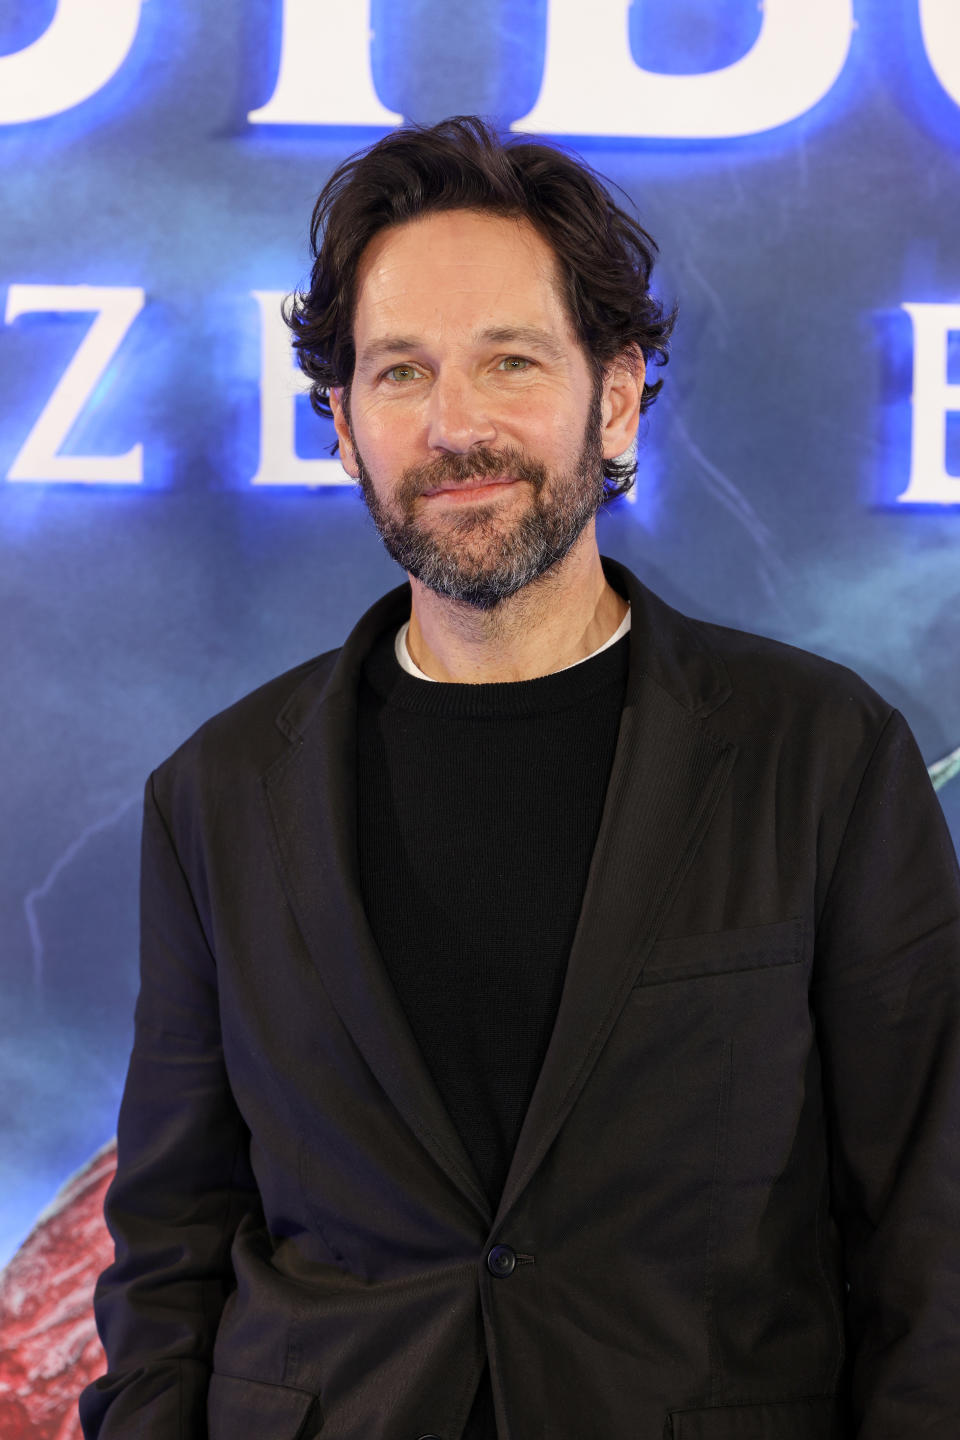 Paul Rudd in a black suit stands smiling at a "Ant-Man and the Wasp: Quantumania" event